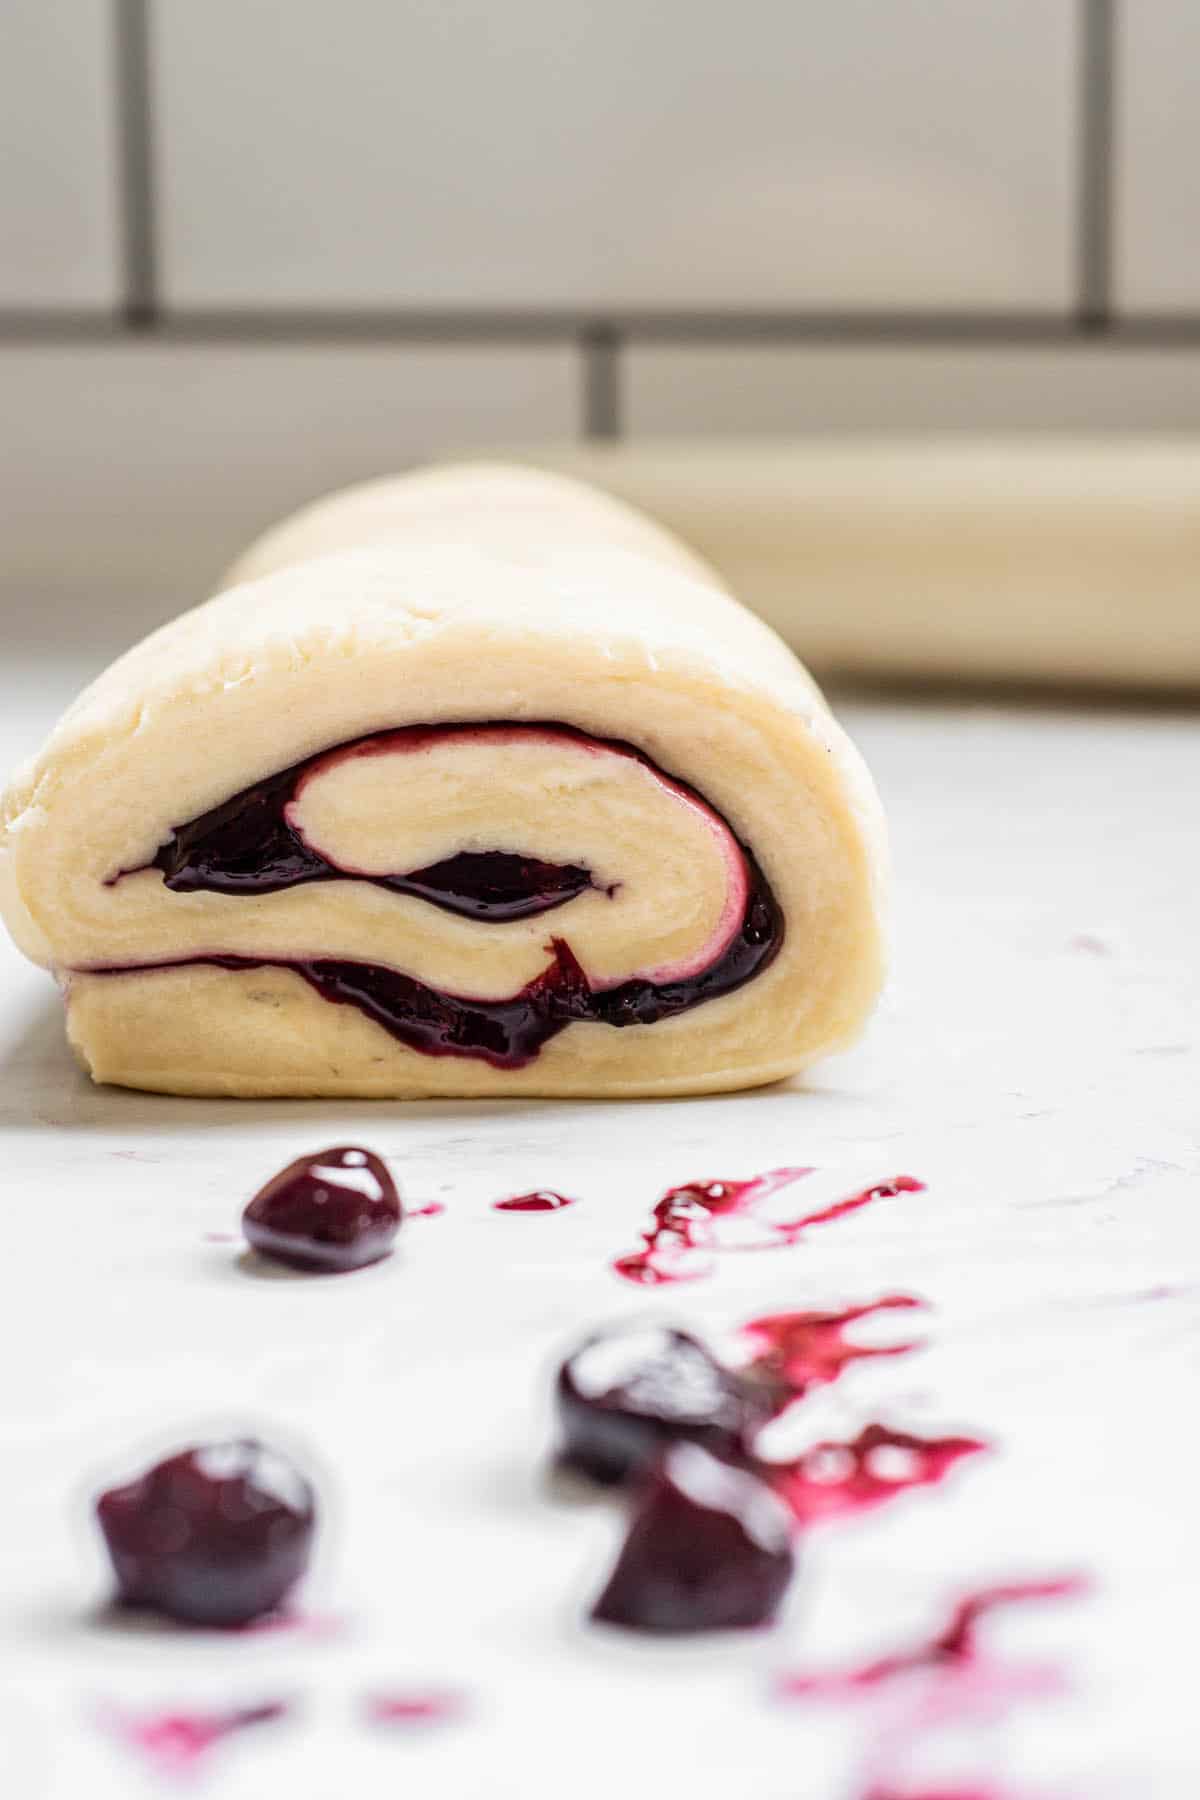 a log of blueberry roll.